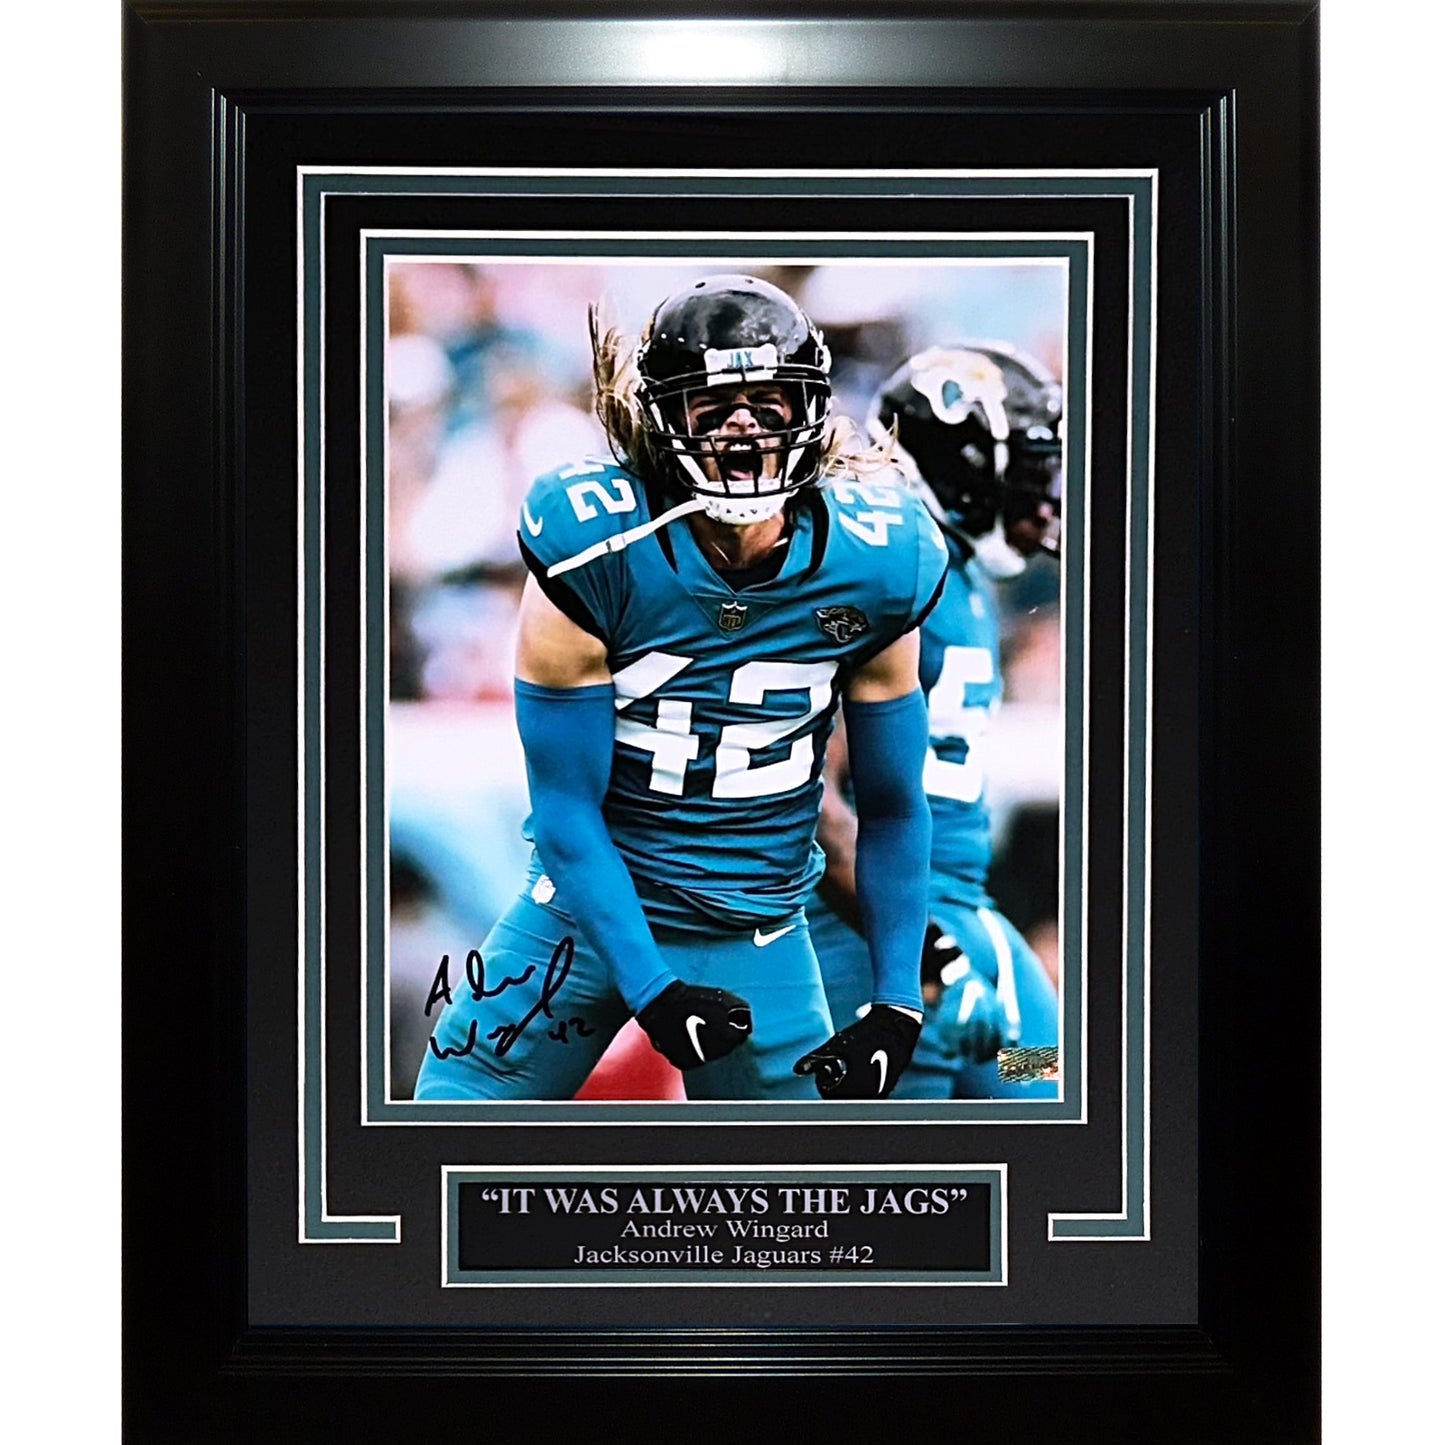 Andrew Wingard Autographed Jacksonville Jaguars Deluxe Framed 8x10 Photo "It was Always the Jags"